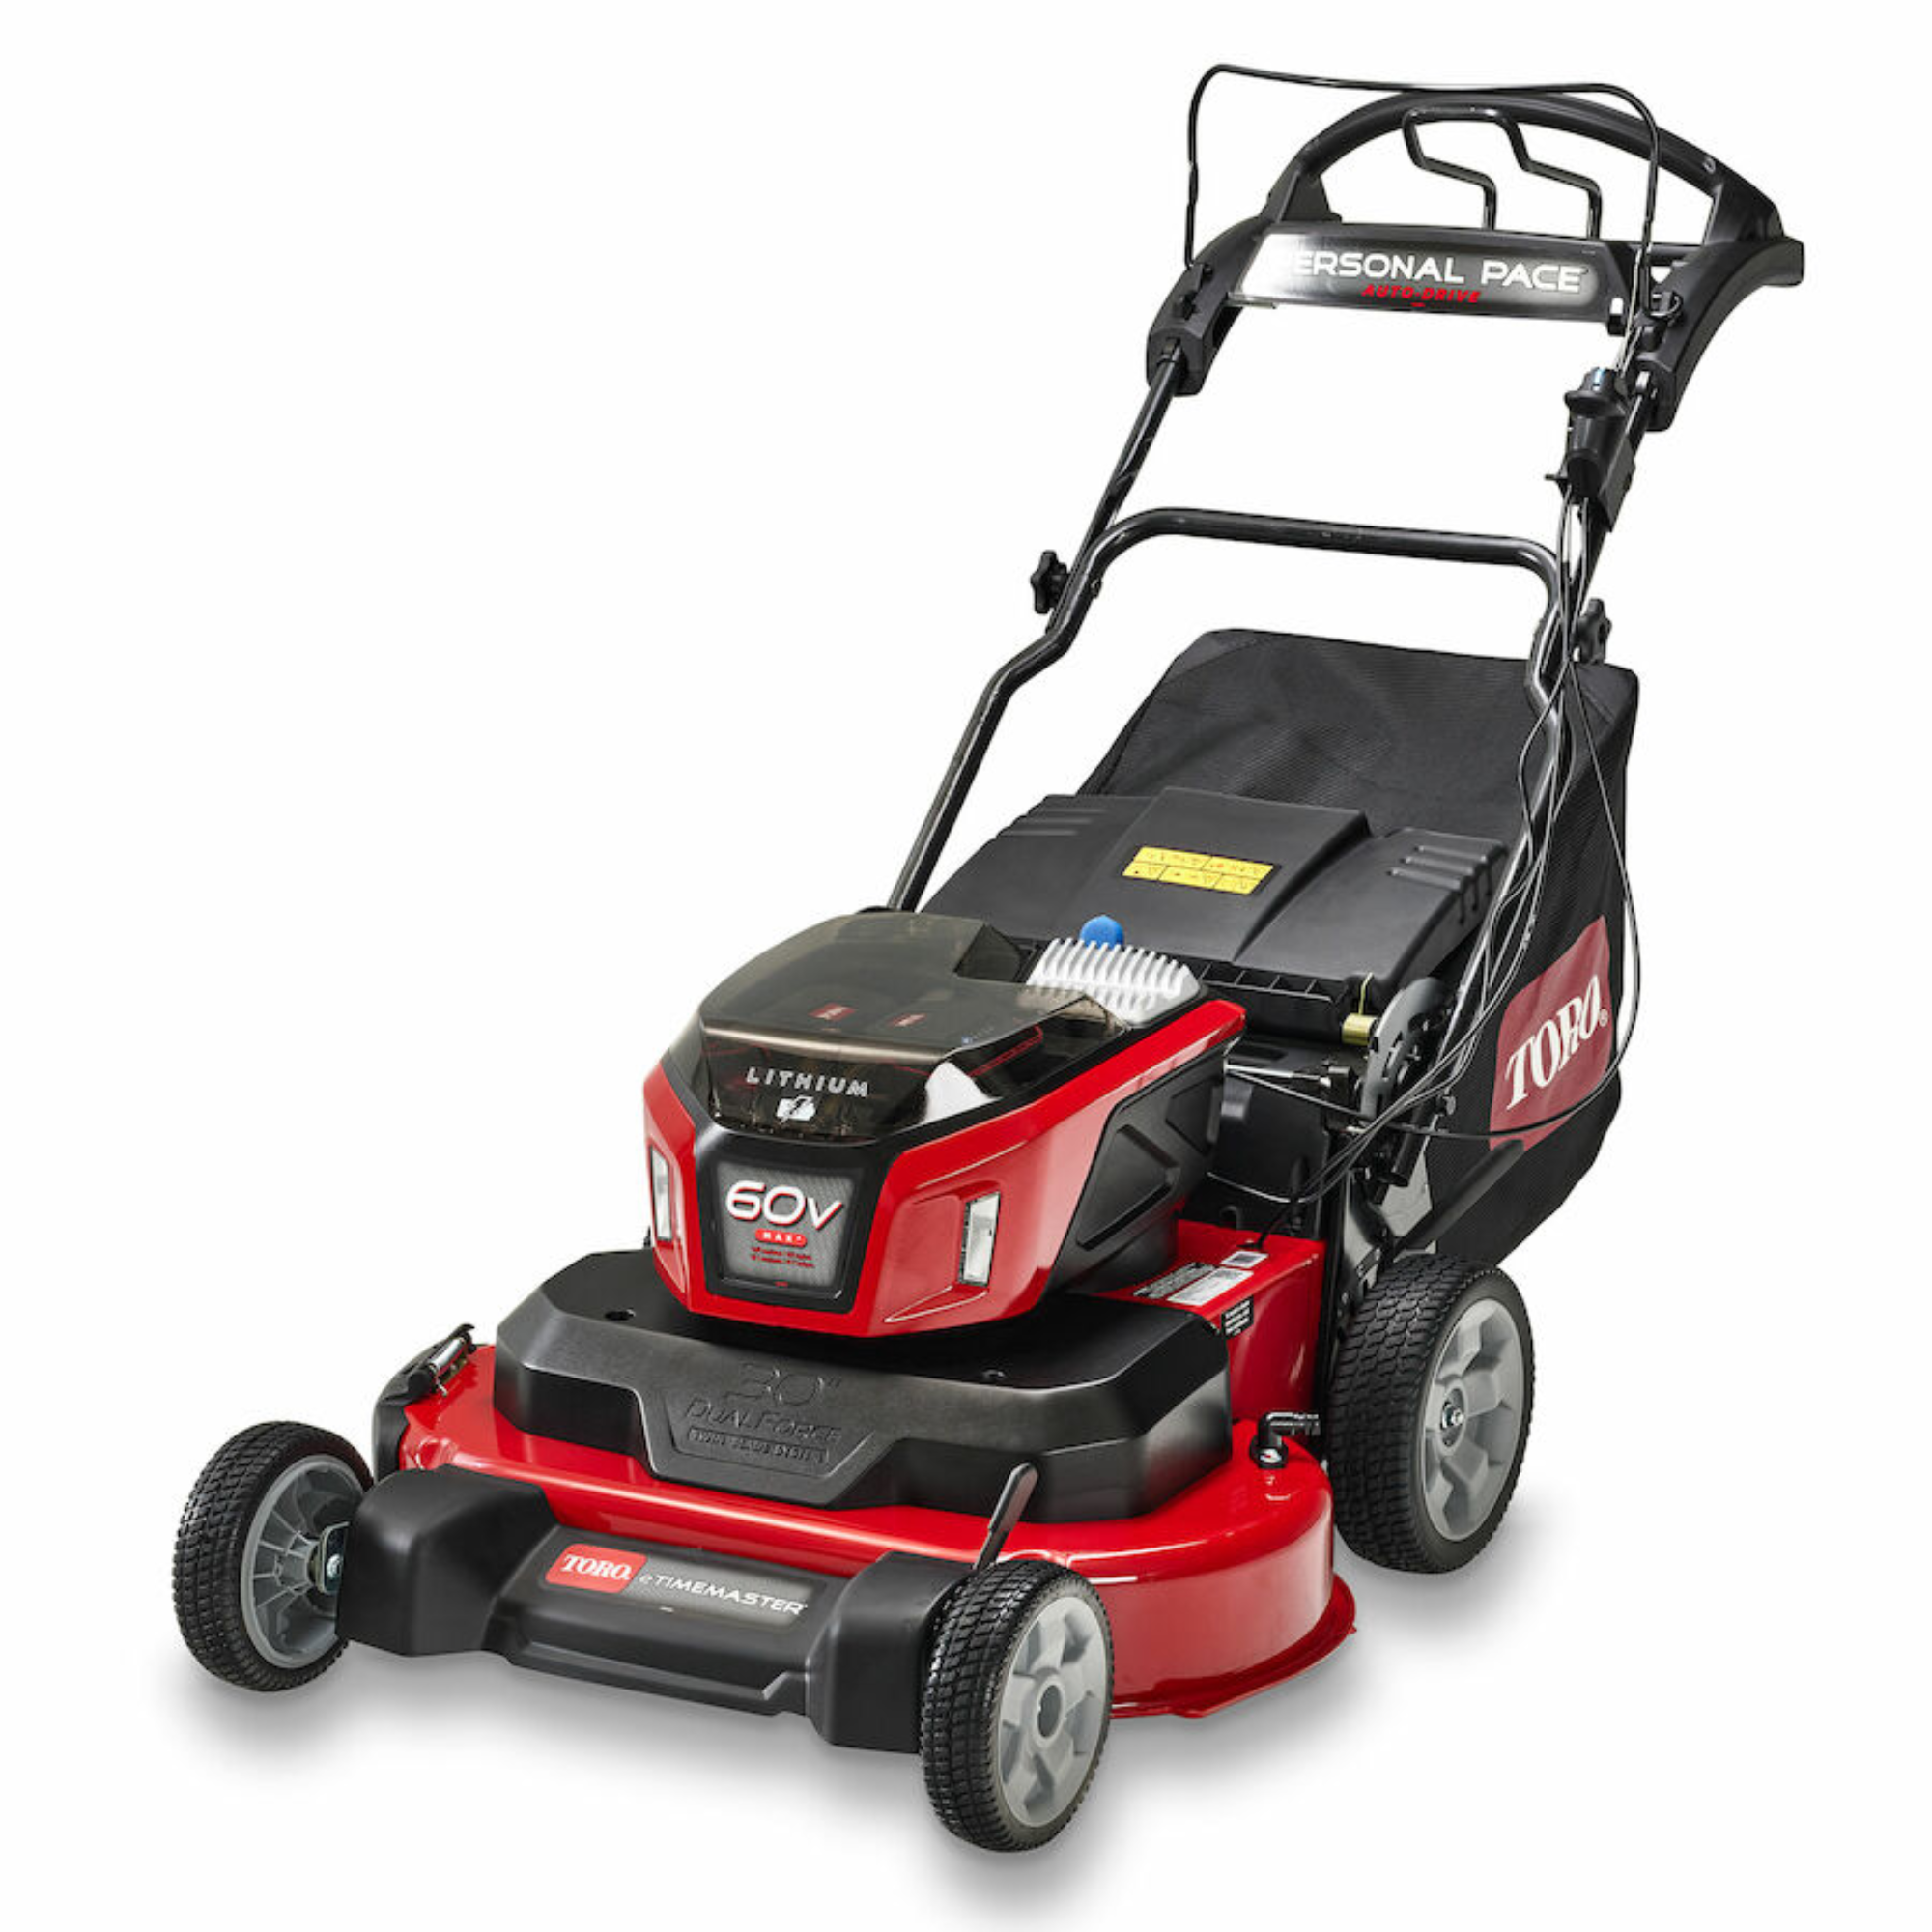 60V MAX 30 in. eTimeMaster Personal Pace Auto-Drive Lawn Mower Batteries/Chargers Included